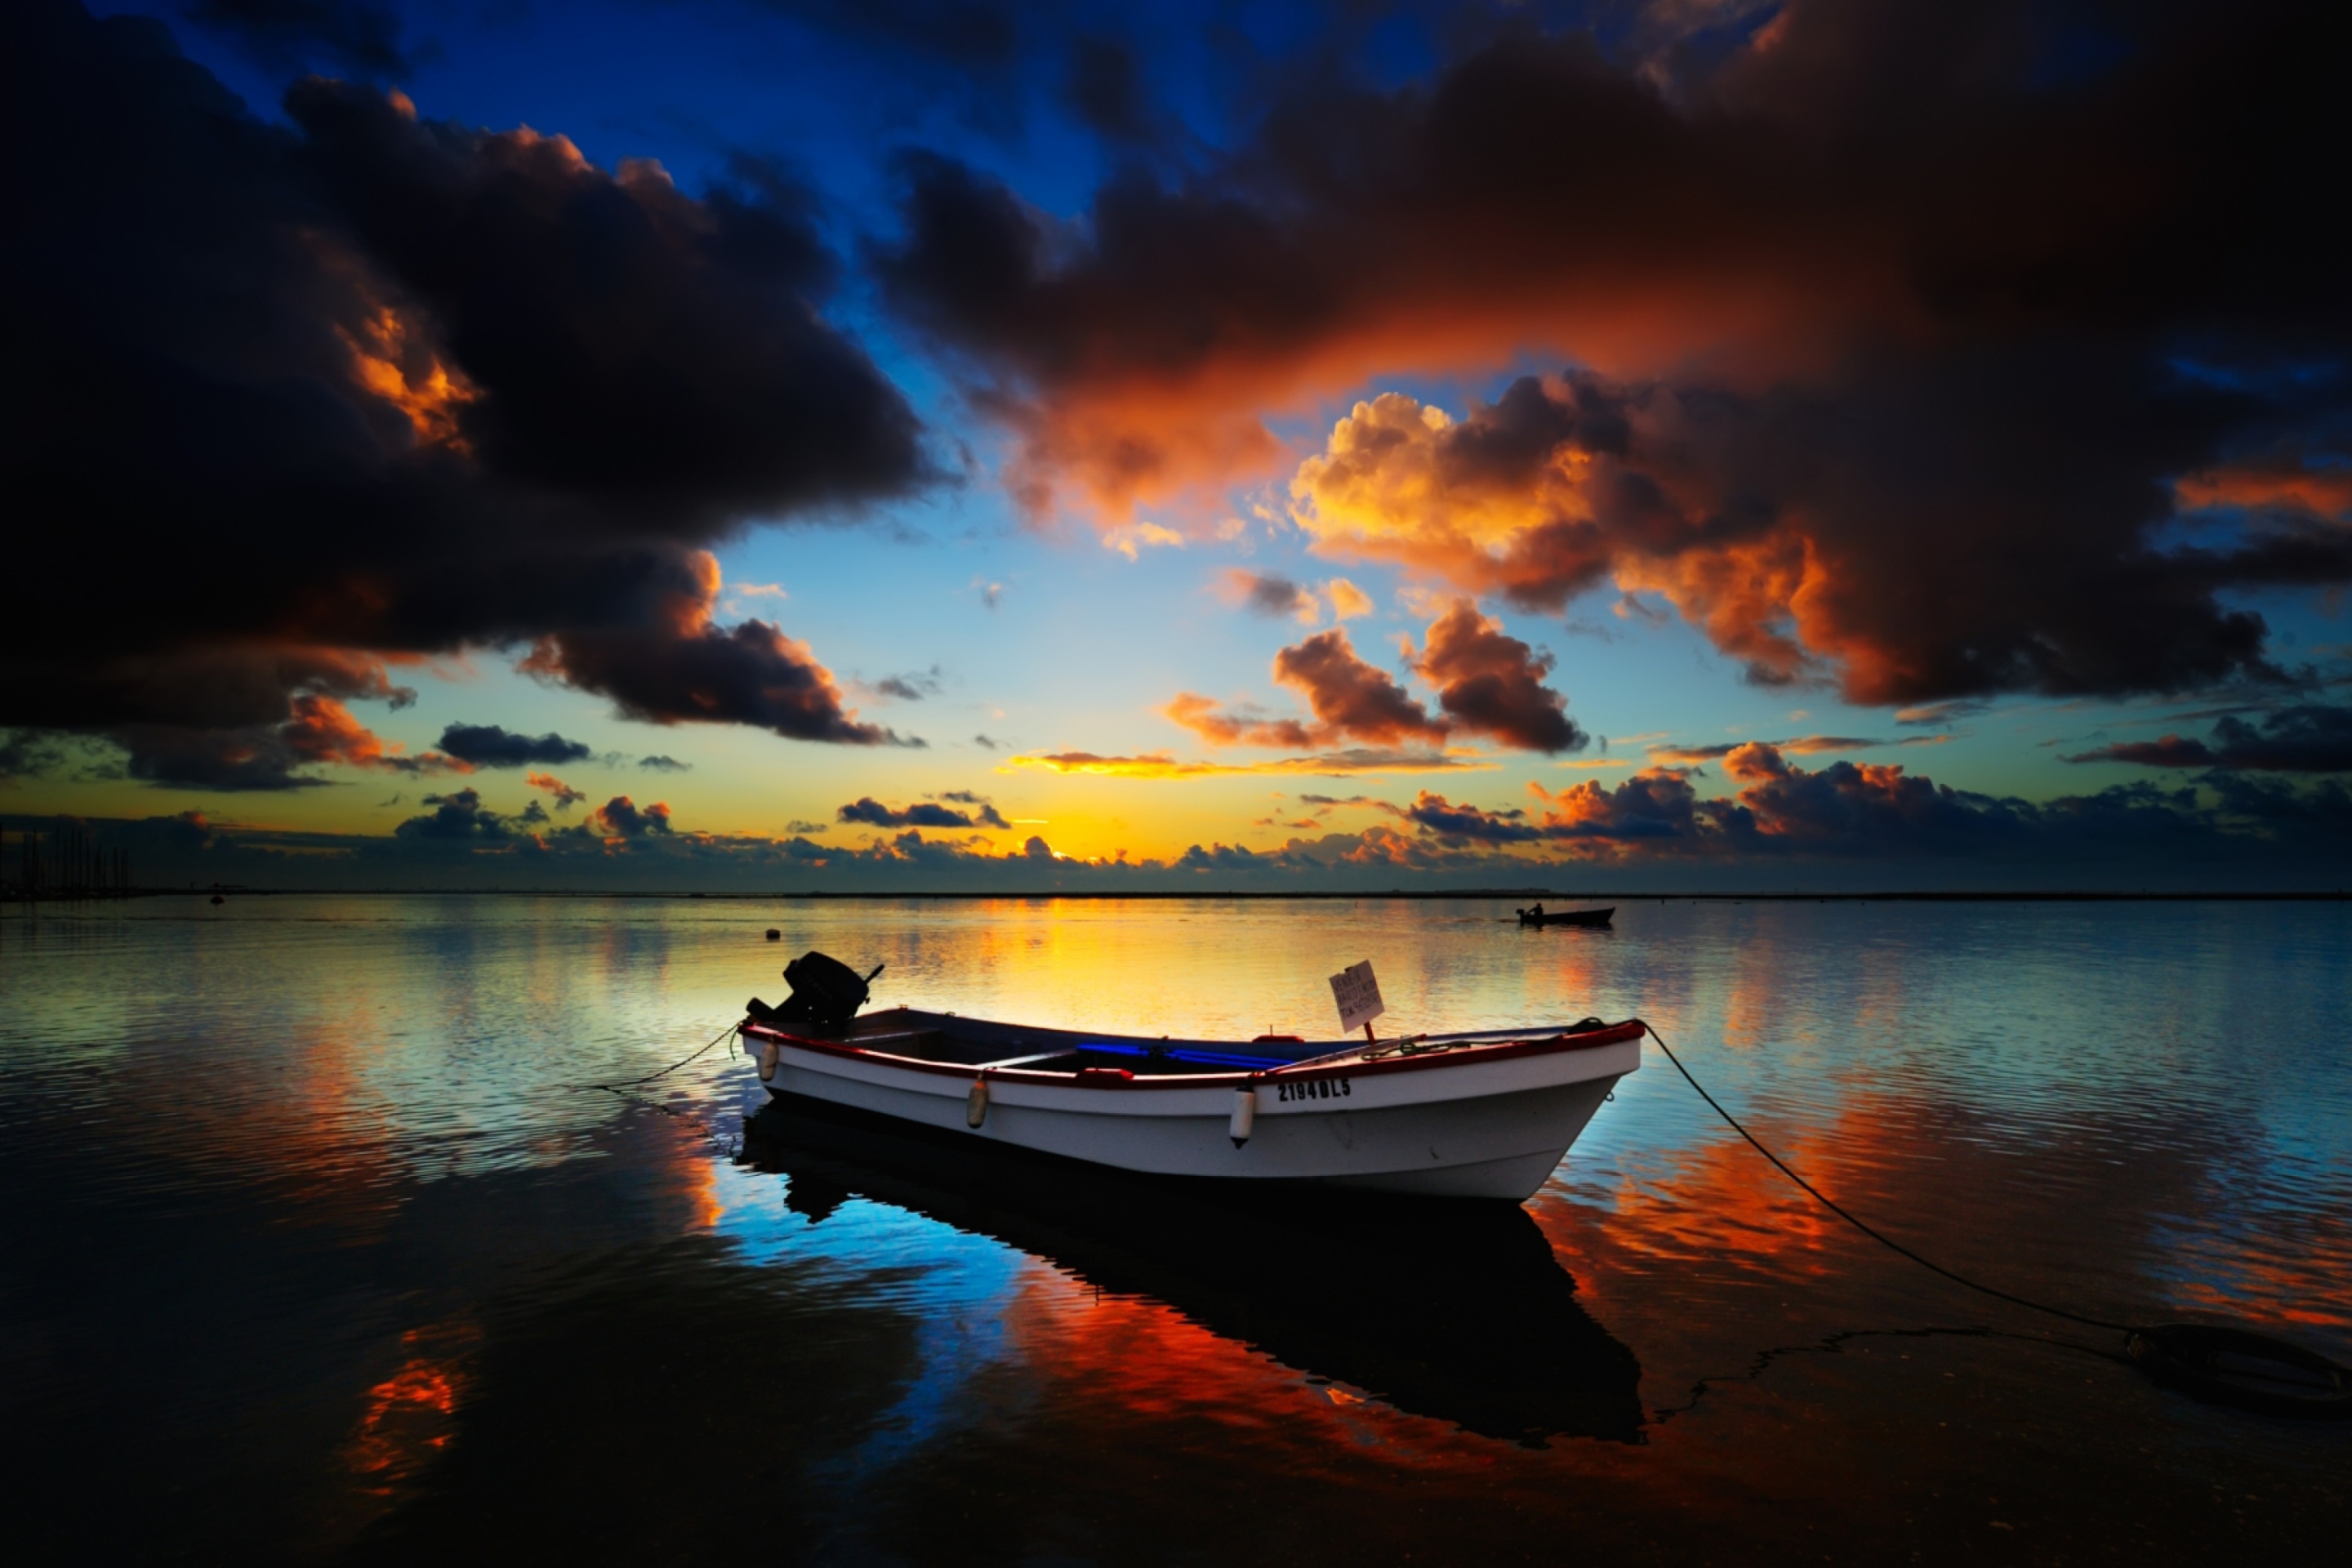 Boat In Sea At Sunset wallpaper 2880x1920